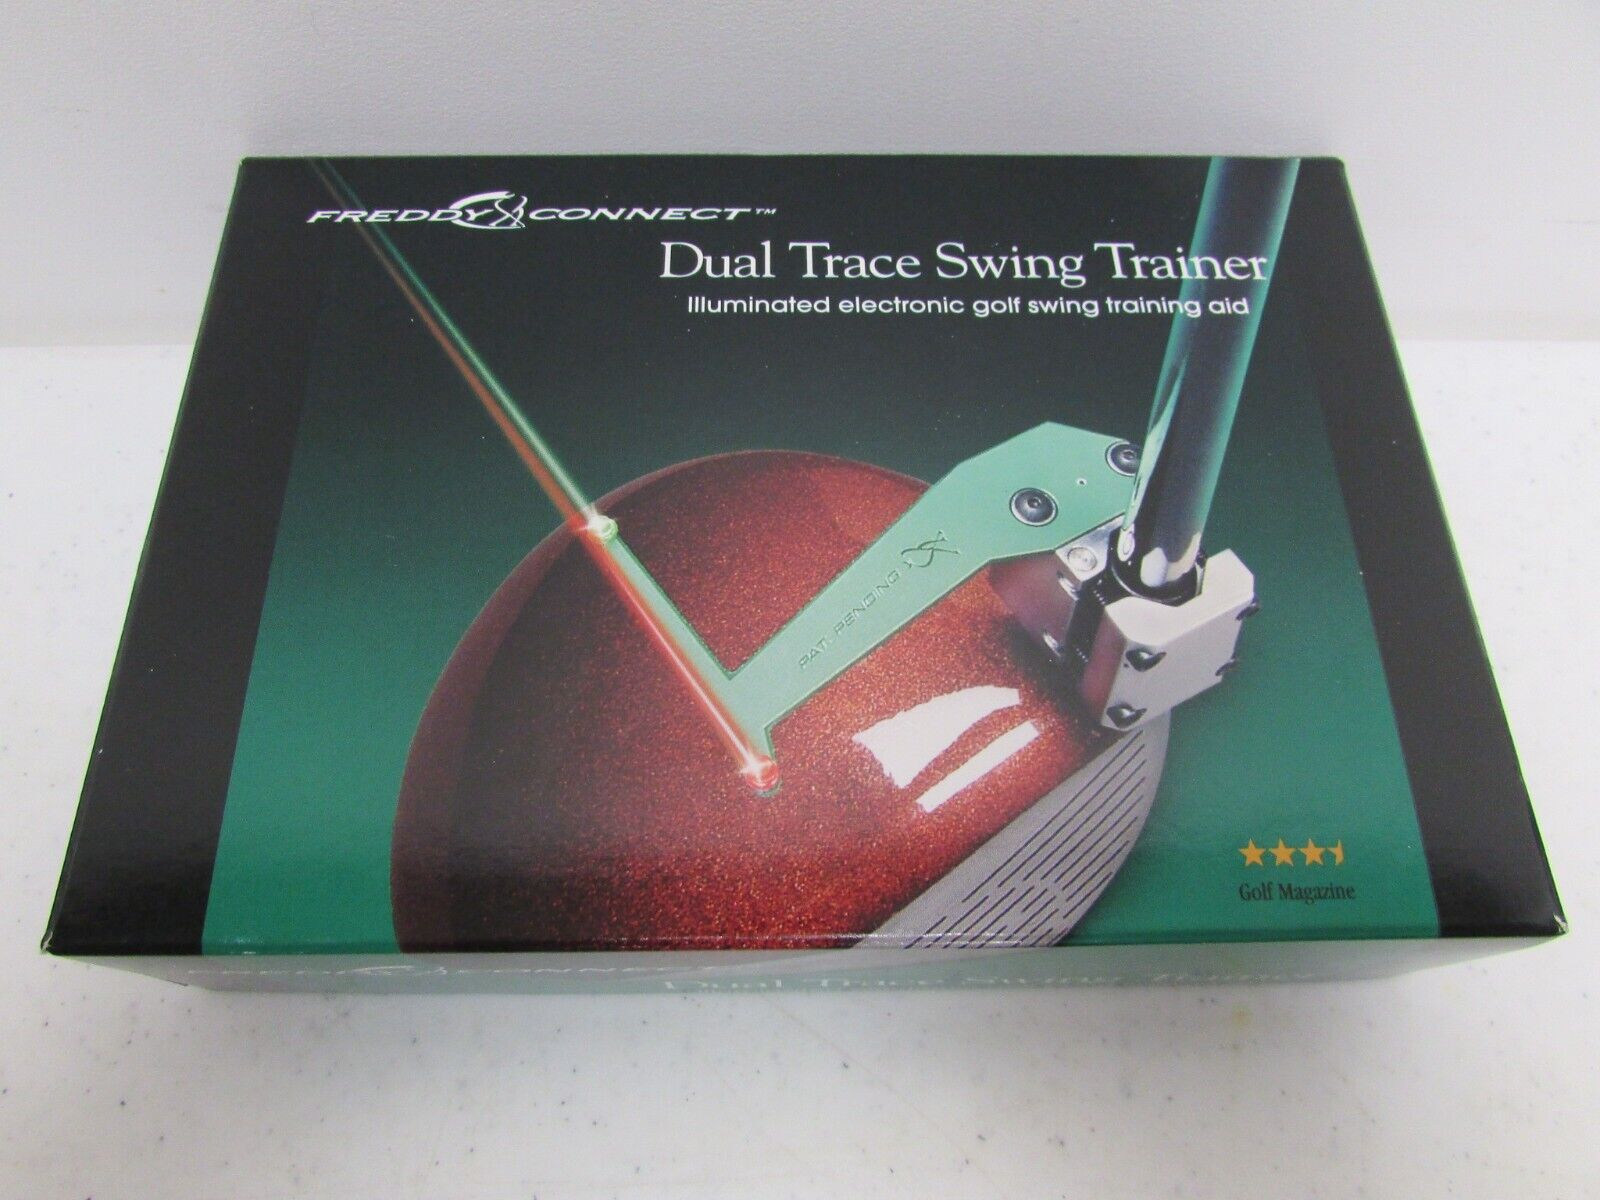 Freddy Connect Dual Trace Swing Trainer - Electronic Golf Swing Training Aid